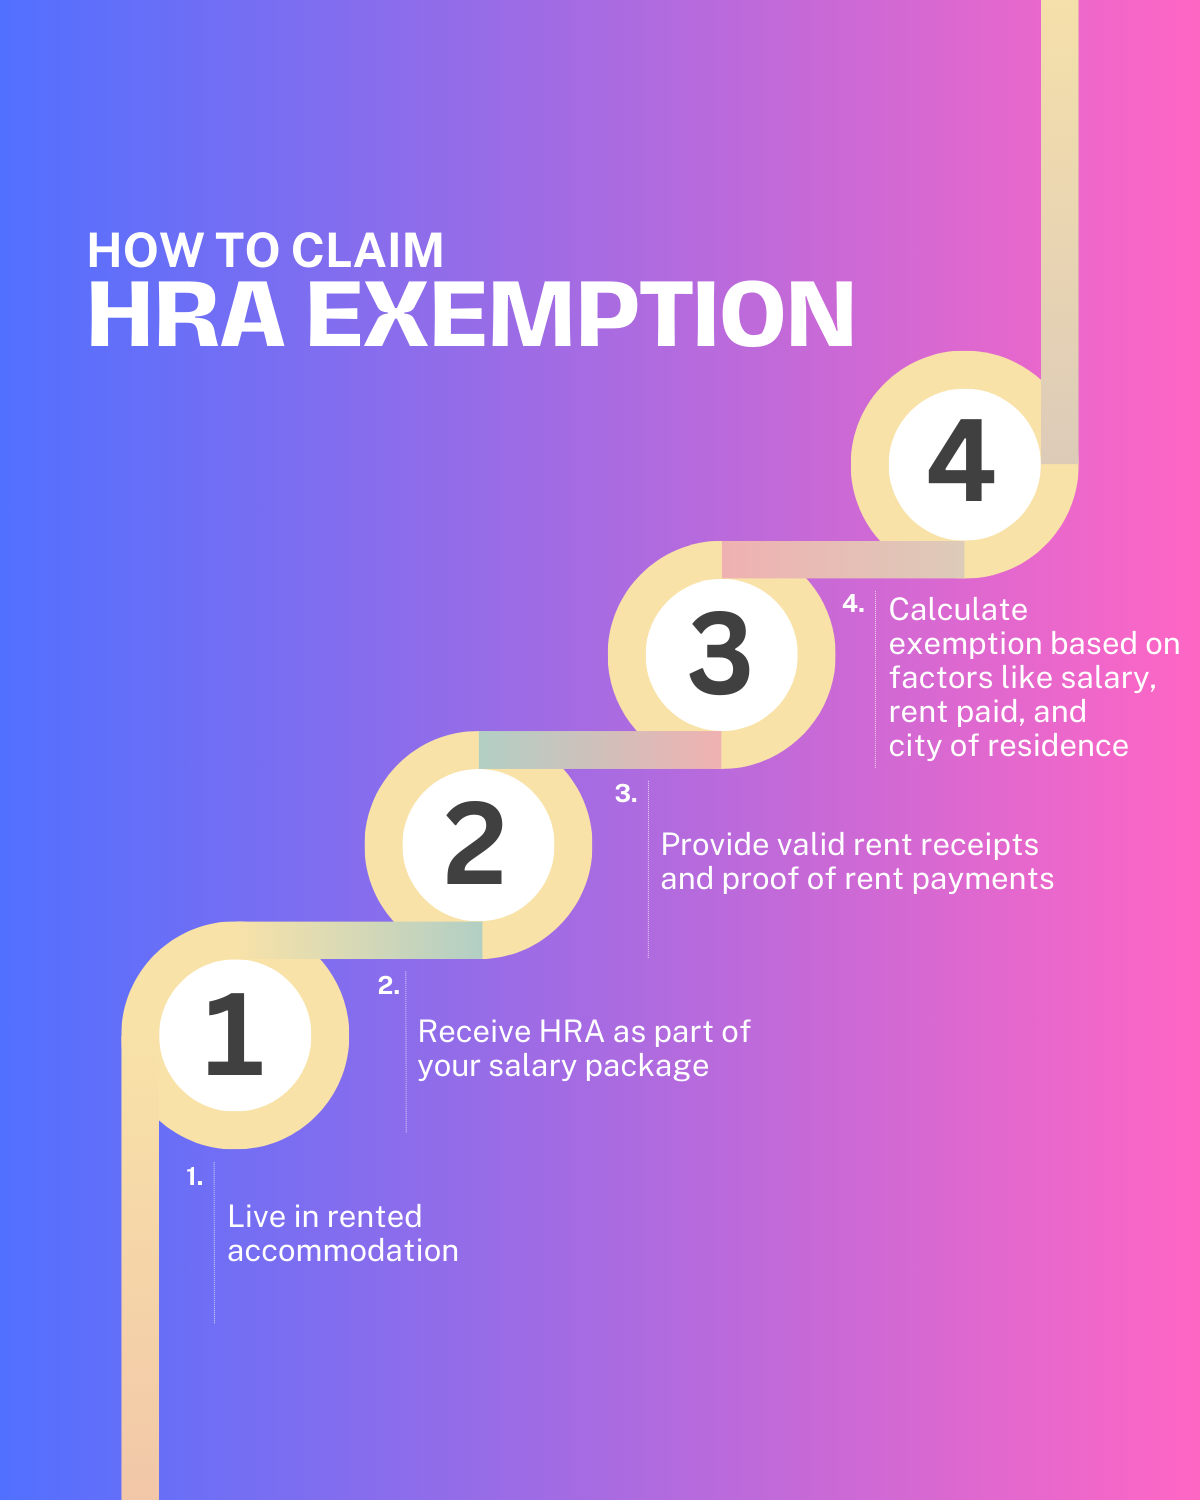 How to Claim HRA Exemption